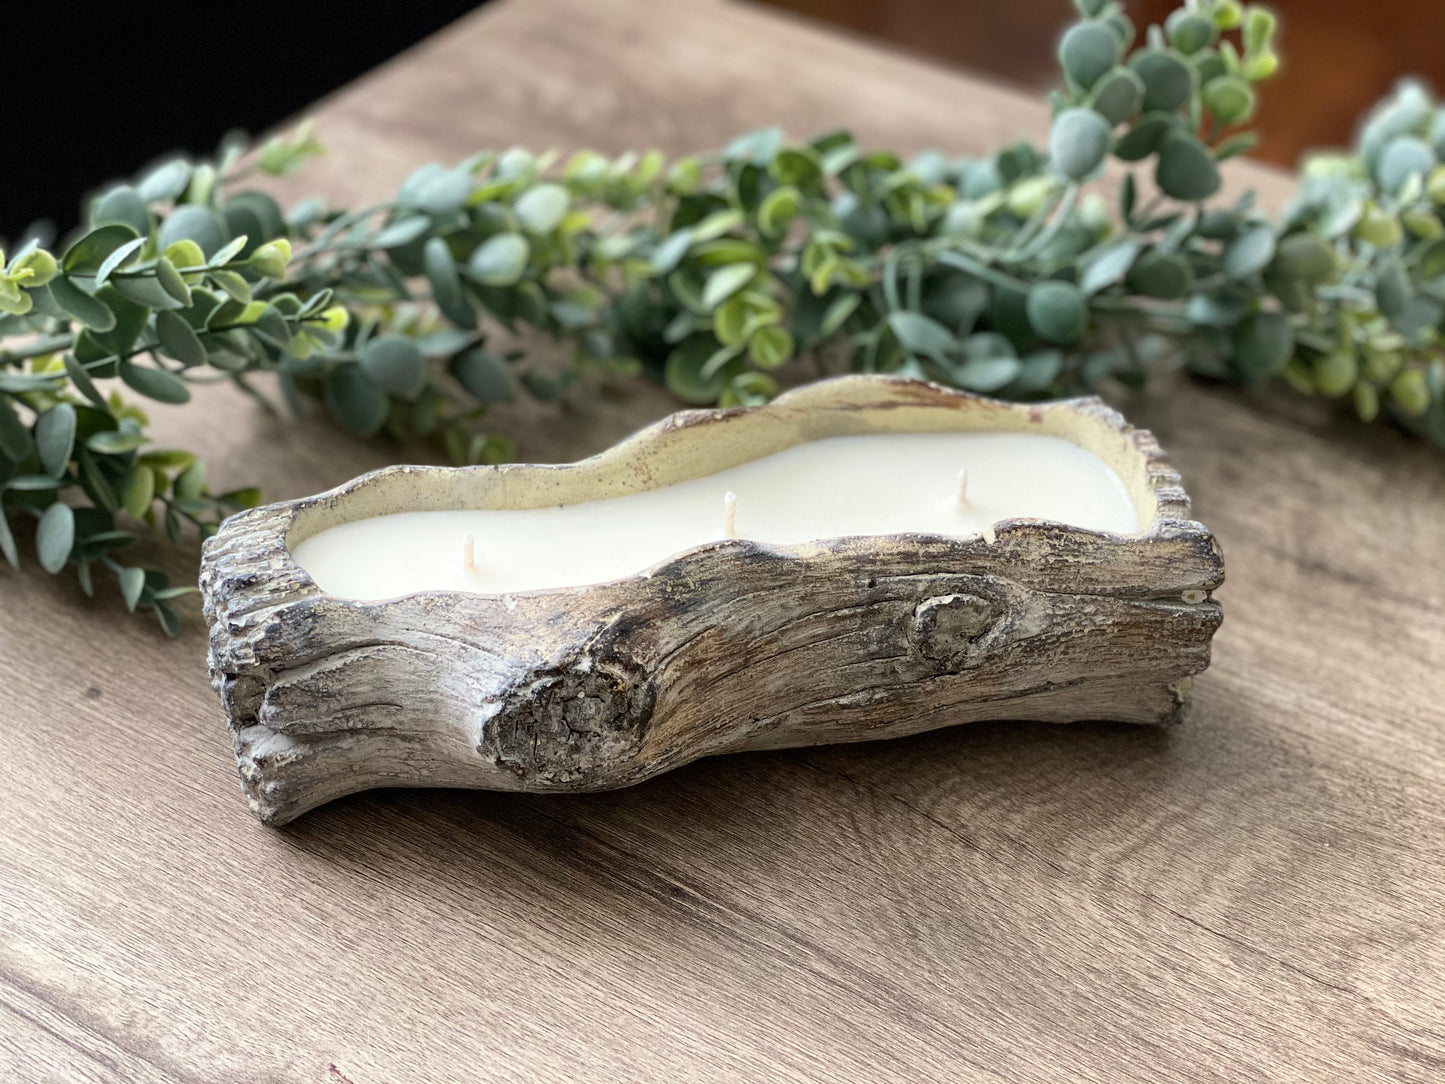 Cement Tree Log Decor Candle | Grapefruit & Mangosteen | 12 oz. A unique piece of home decor that works perfectly for indoor and outdoor space. When you finished the candle, this cement log can be used as planter, serving dish and decorative holder. Bluffton Candles - The Bluffton Shop